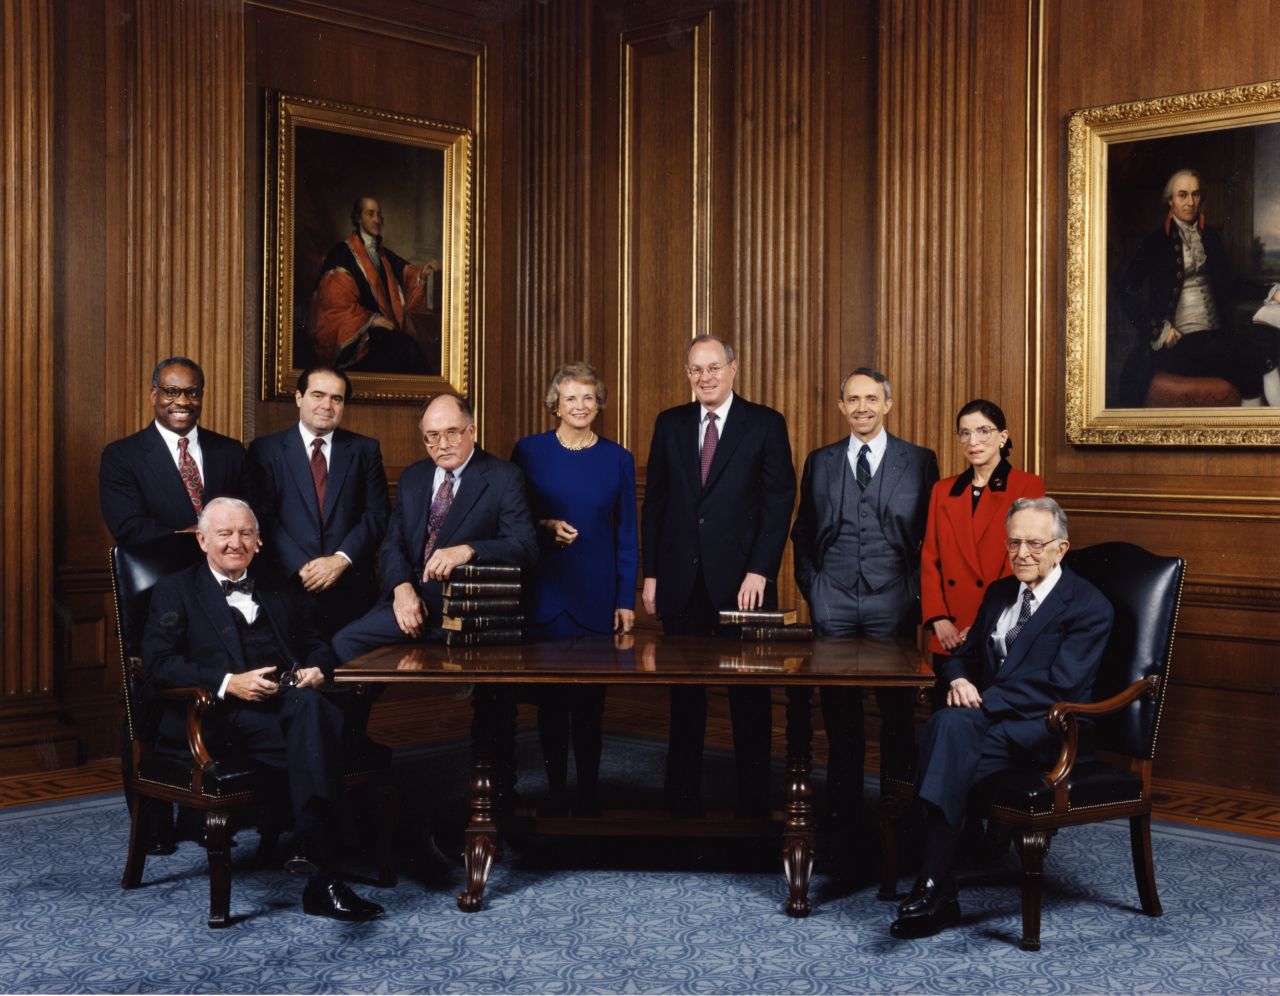 This informal group photo was taken of the US Supreme Court in December 1993. From left are Clarence Thomas, John Paul Stevens, Antonin Scalia, Chief Justice William Rehnquist, Sandra Day O'Connor, Anthony Kennedy, David Souter, Ginsburg and Harry Blackmun.